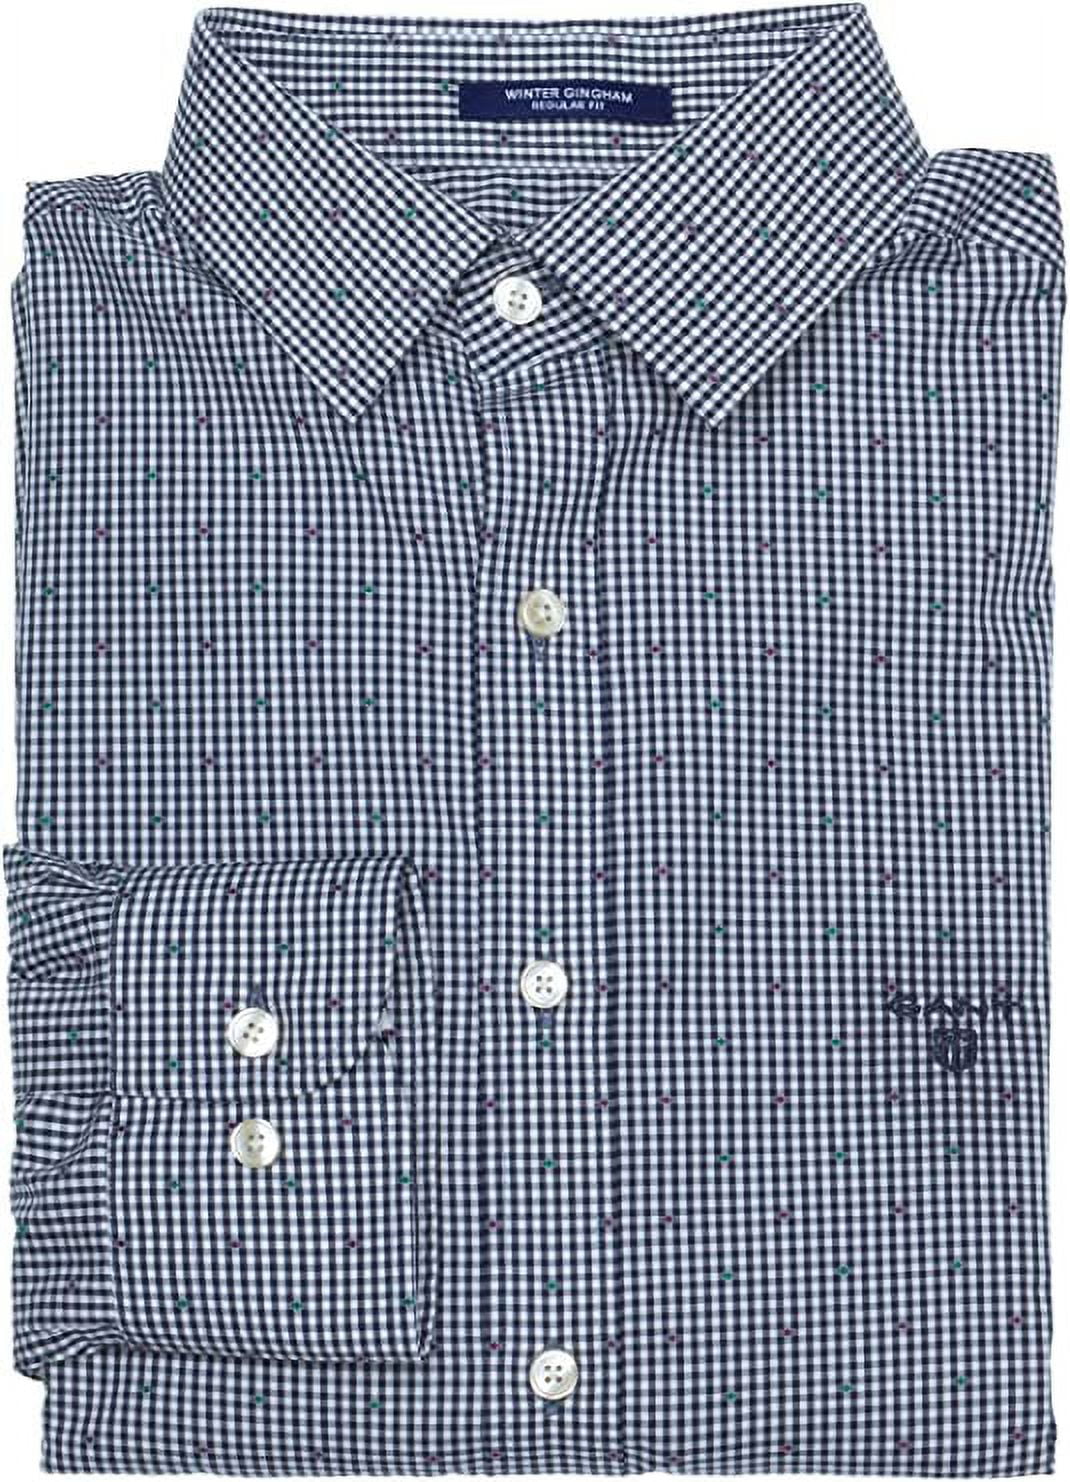 Reduced Price in Men's Woven Shirts